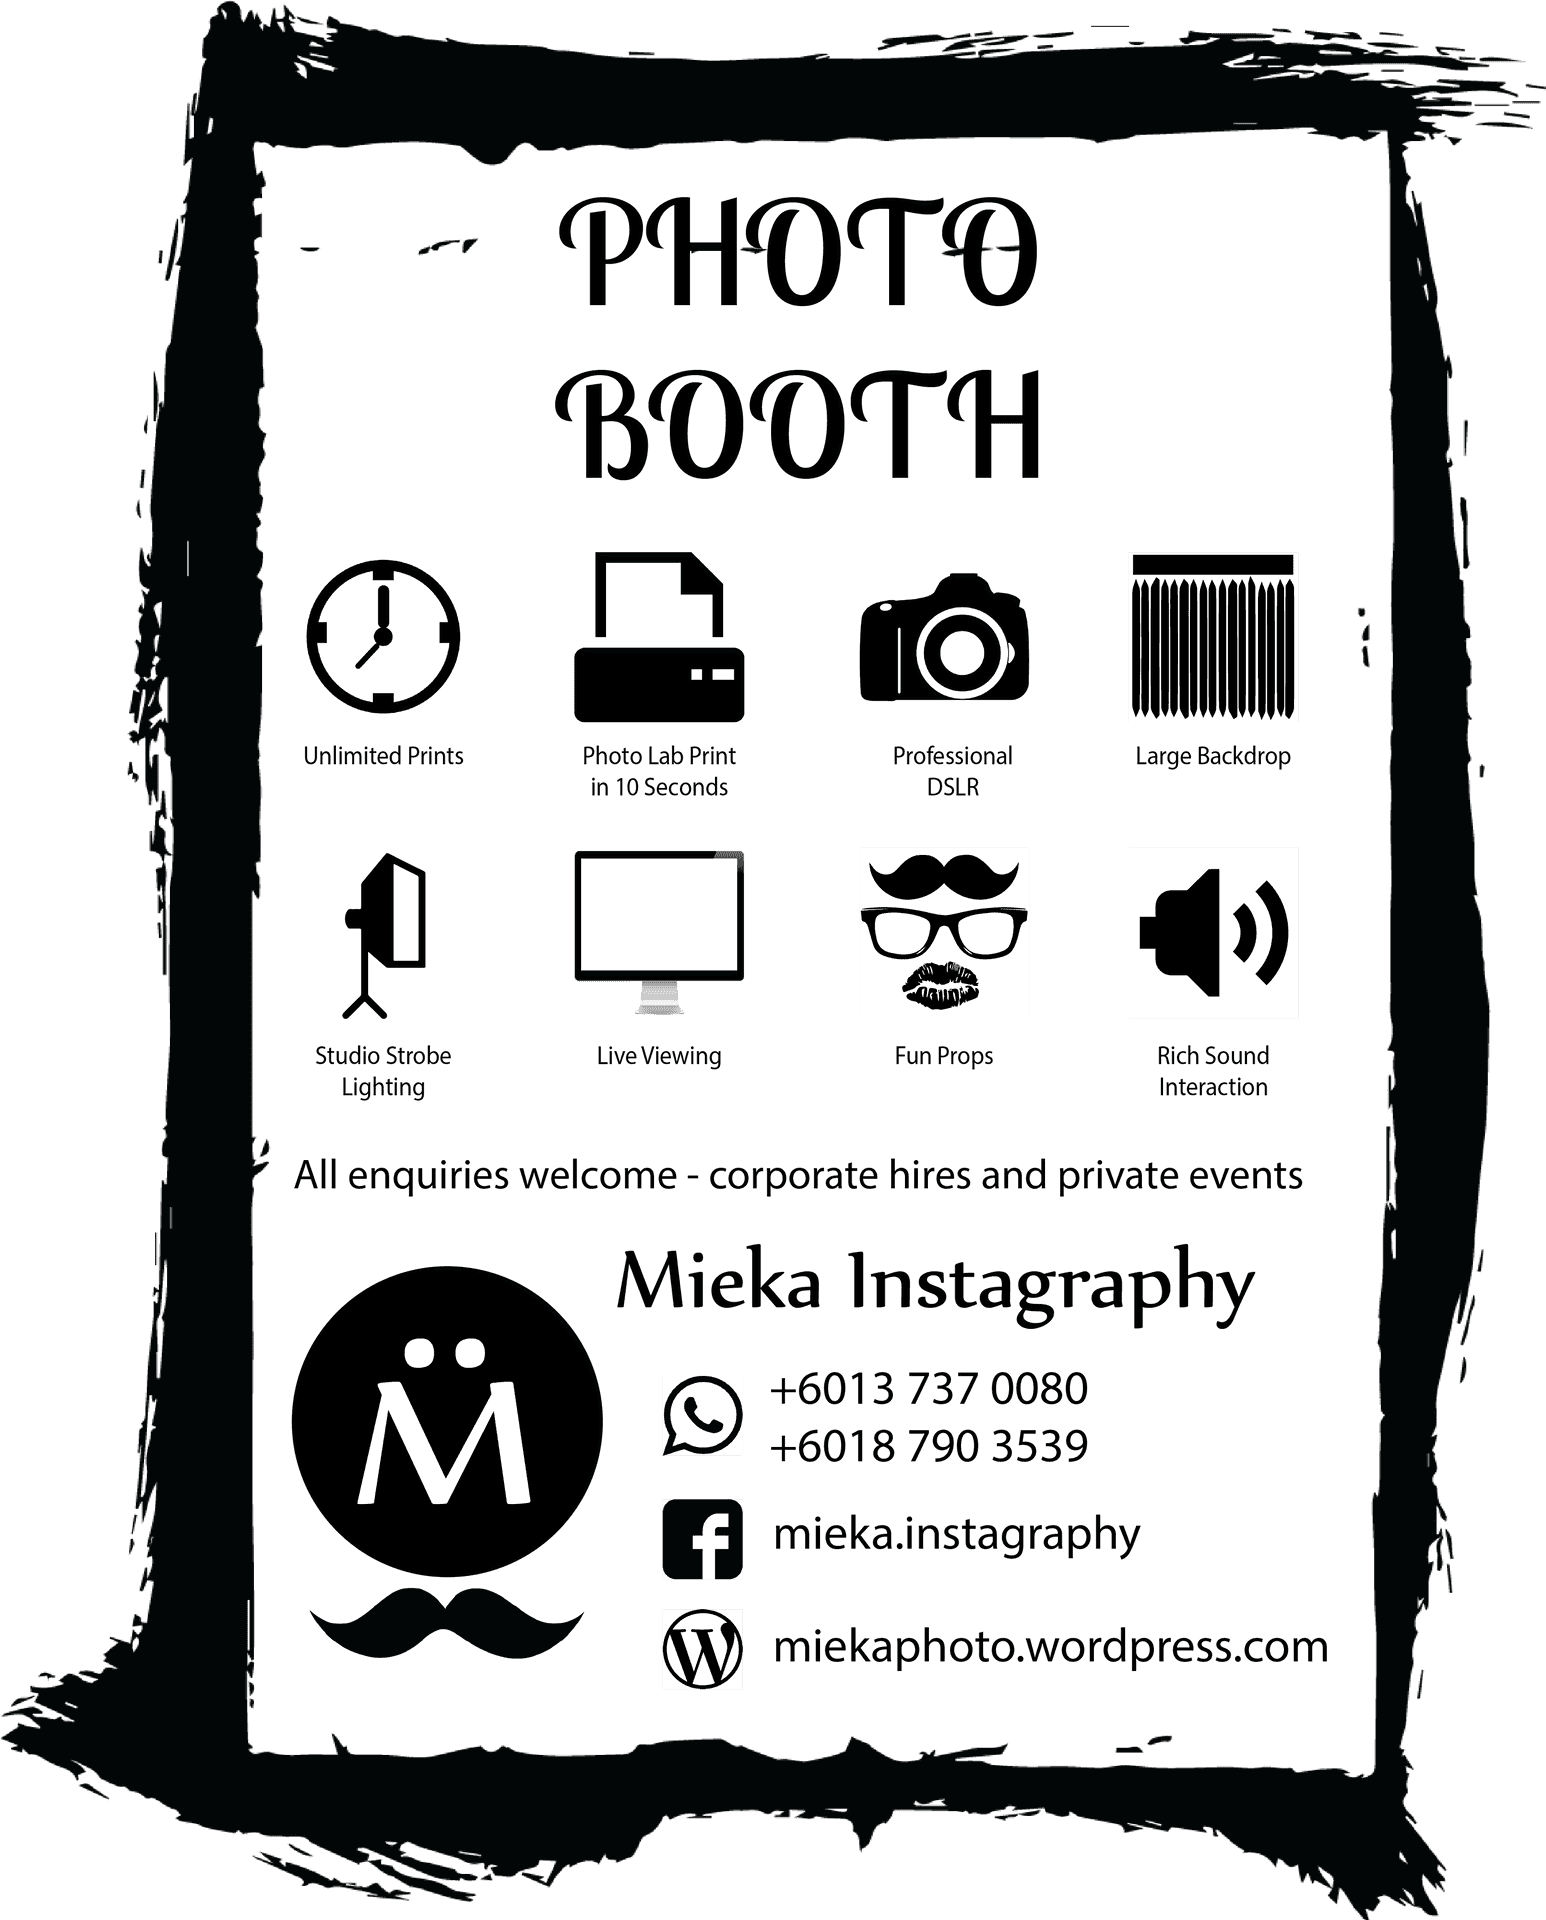 Photobooth Services Advertisement PNG image